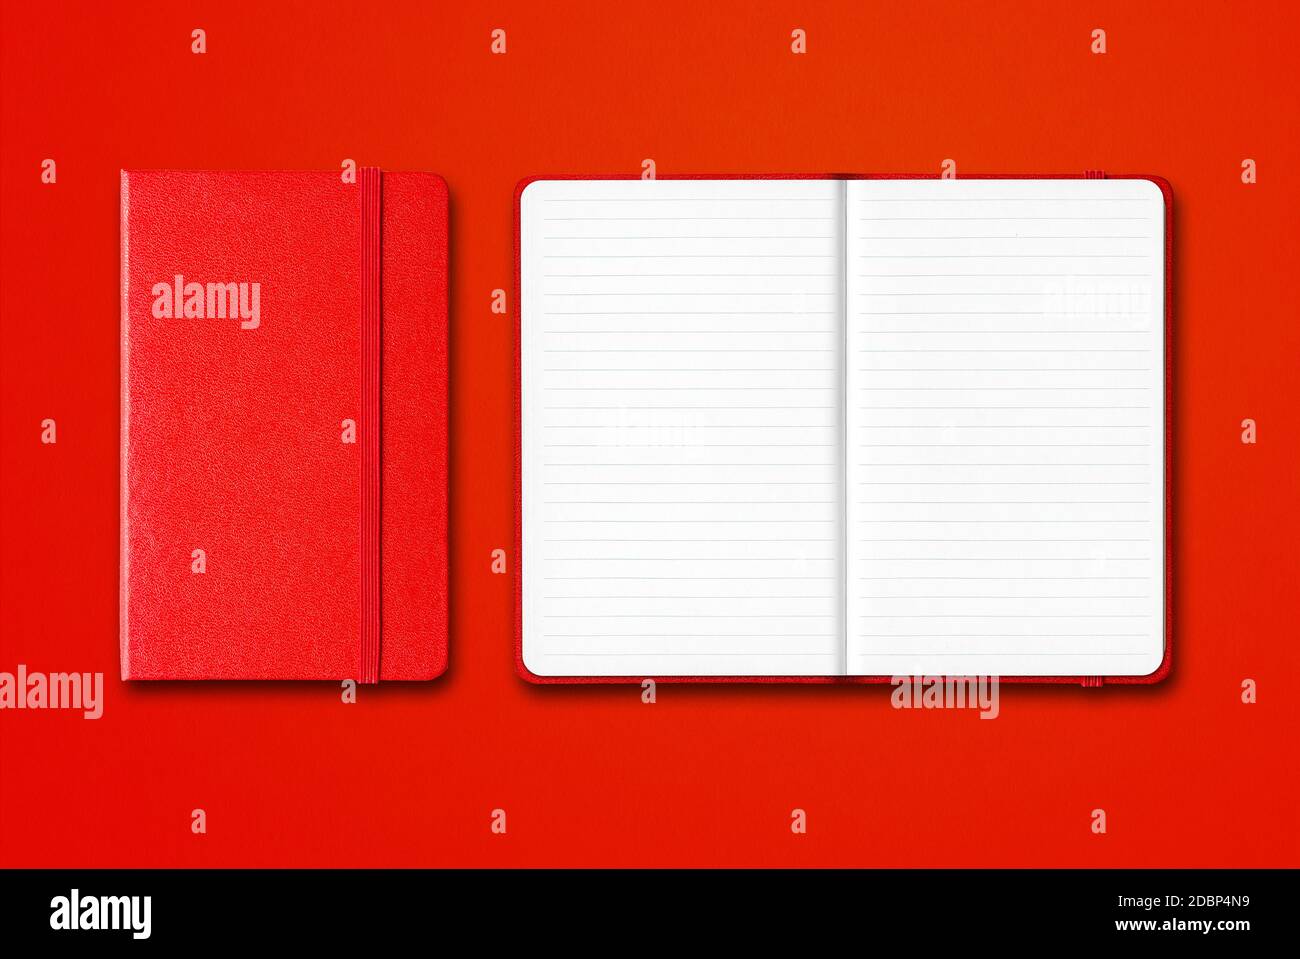 Red closed and open lined notebooks mockup isolated on colorful background Stock Photo